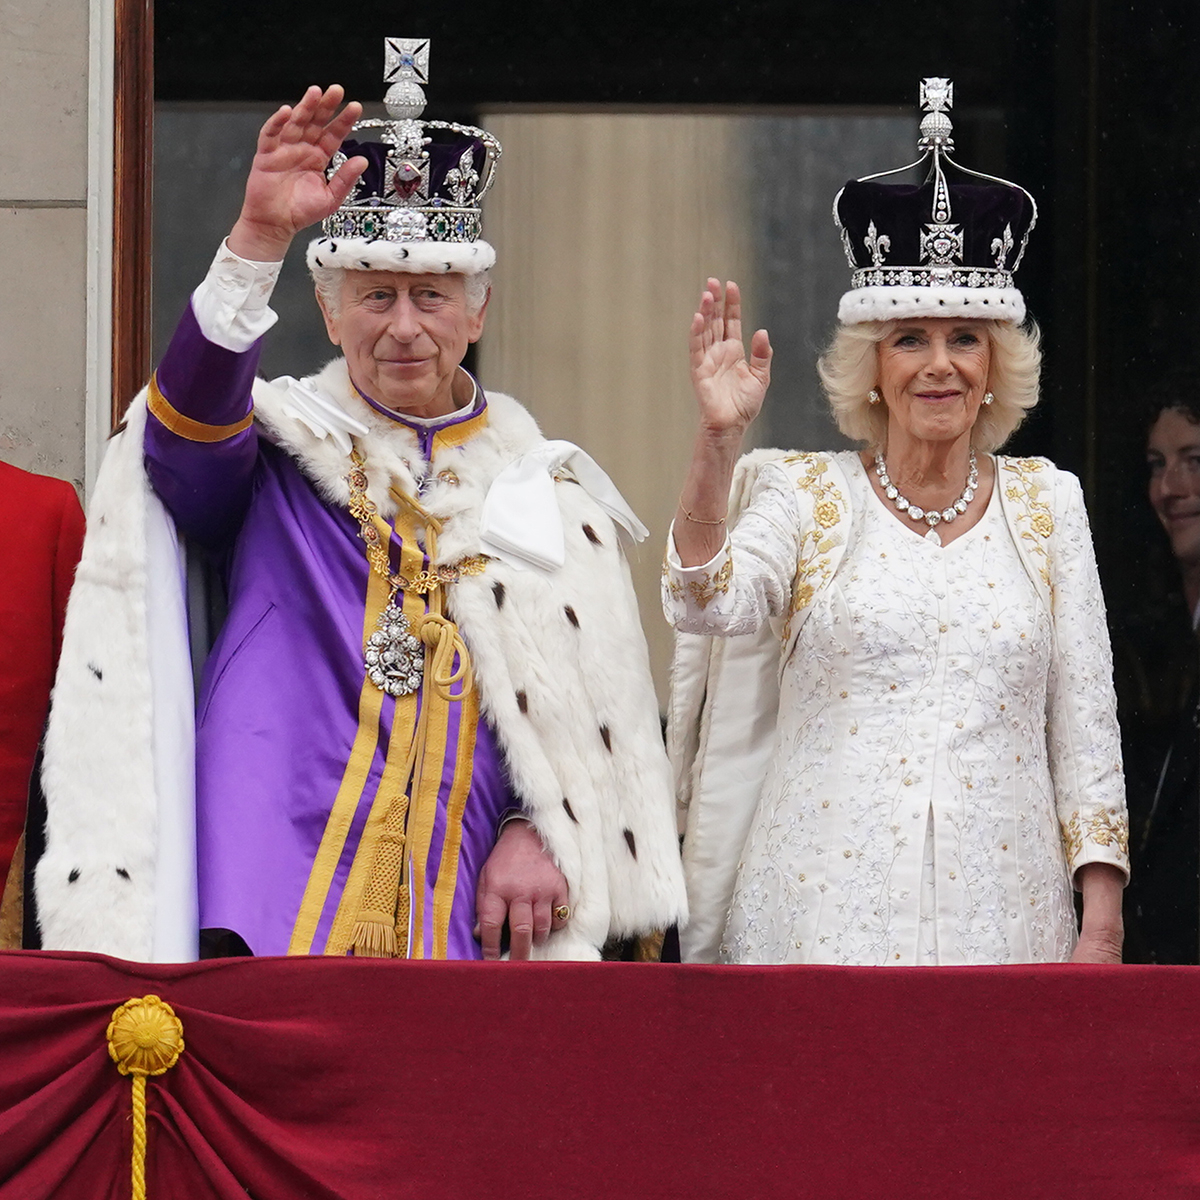 See the Royal Family Unite on Balcony After King Charles’ Coronation